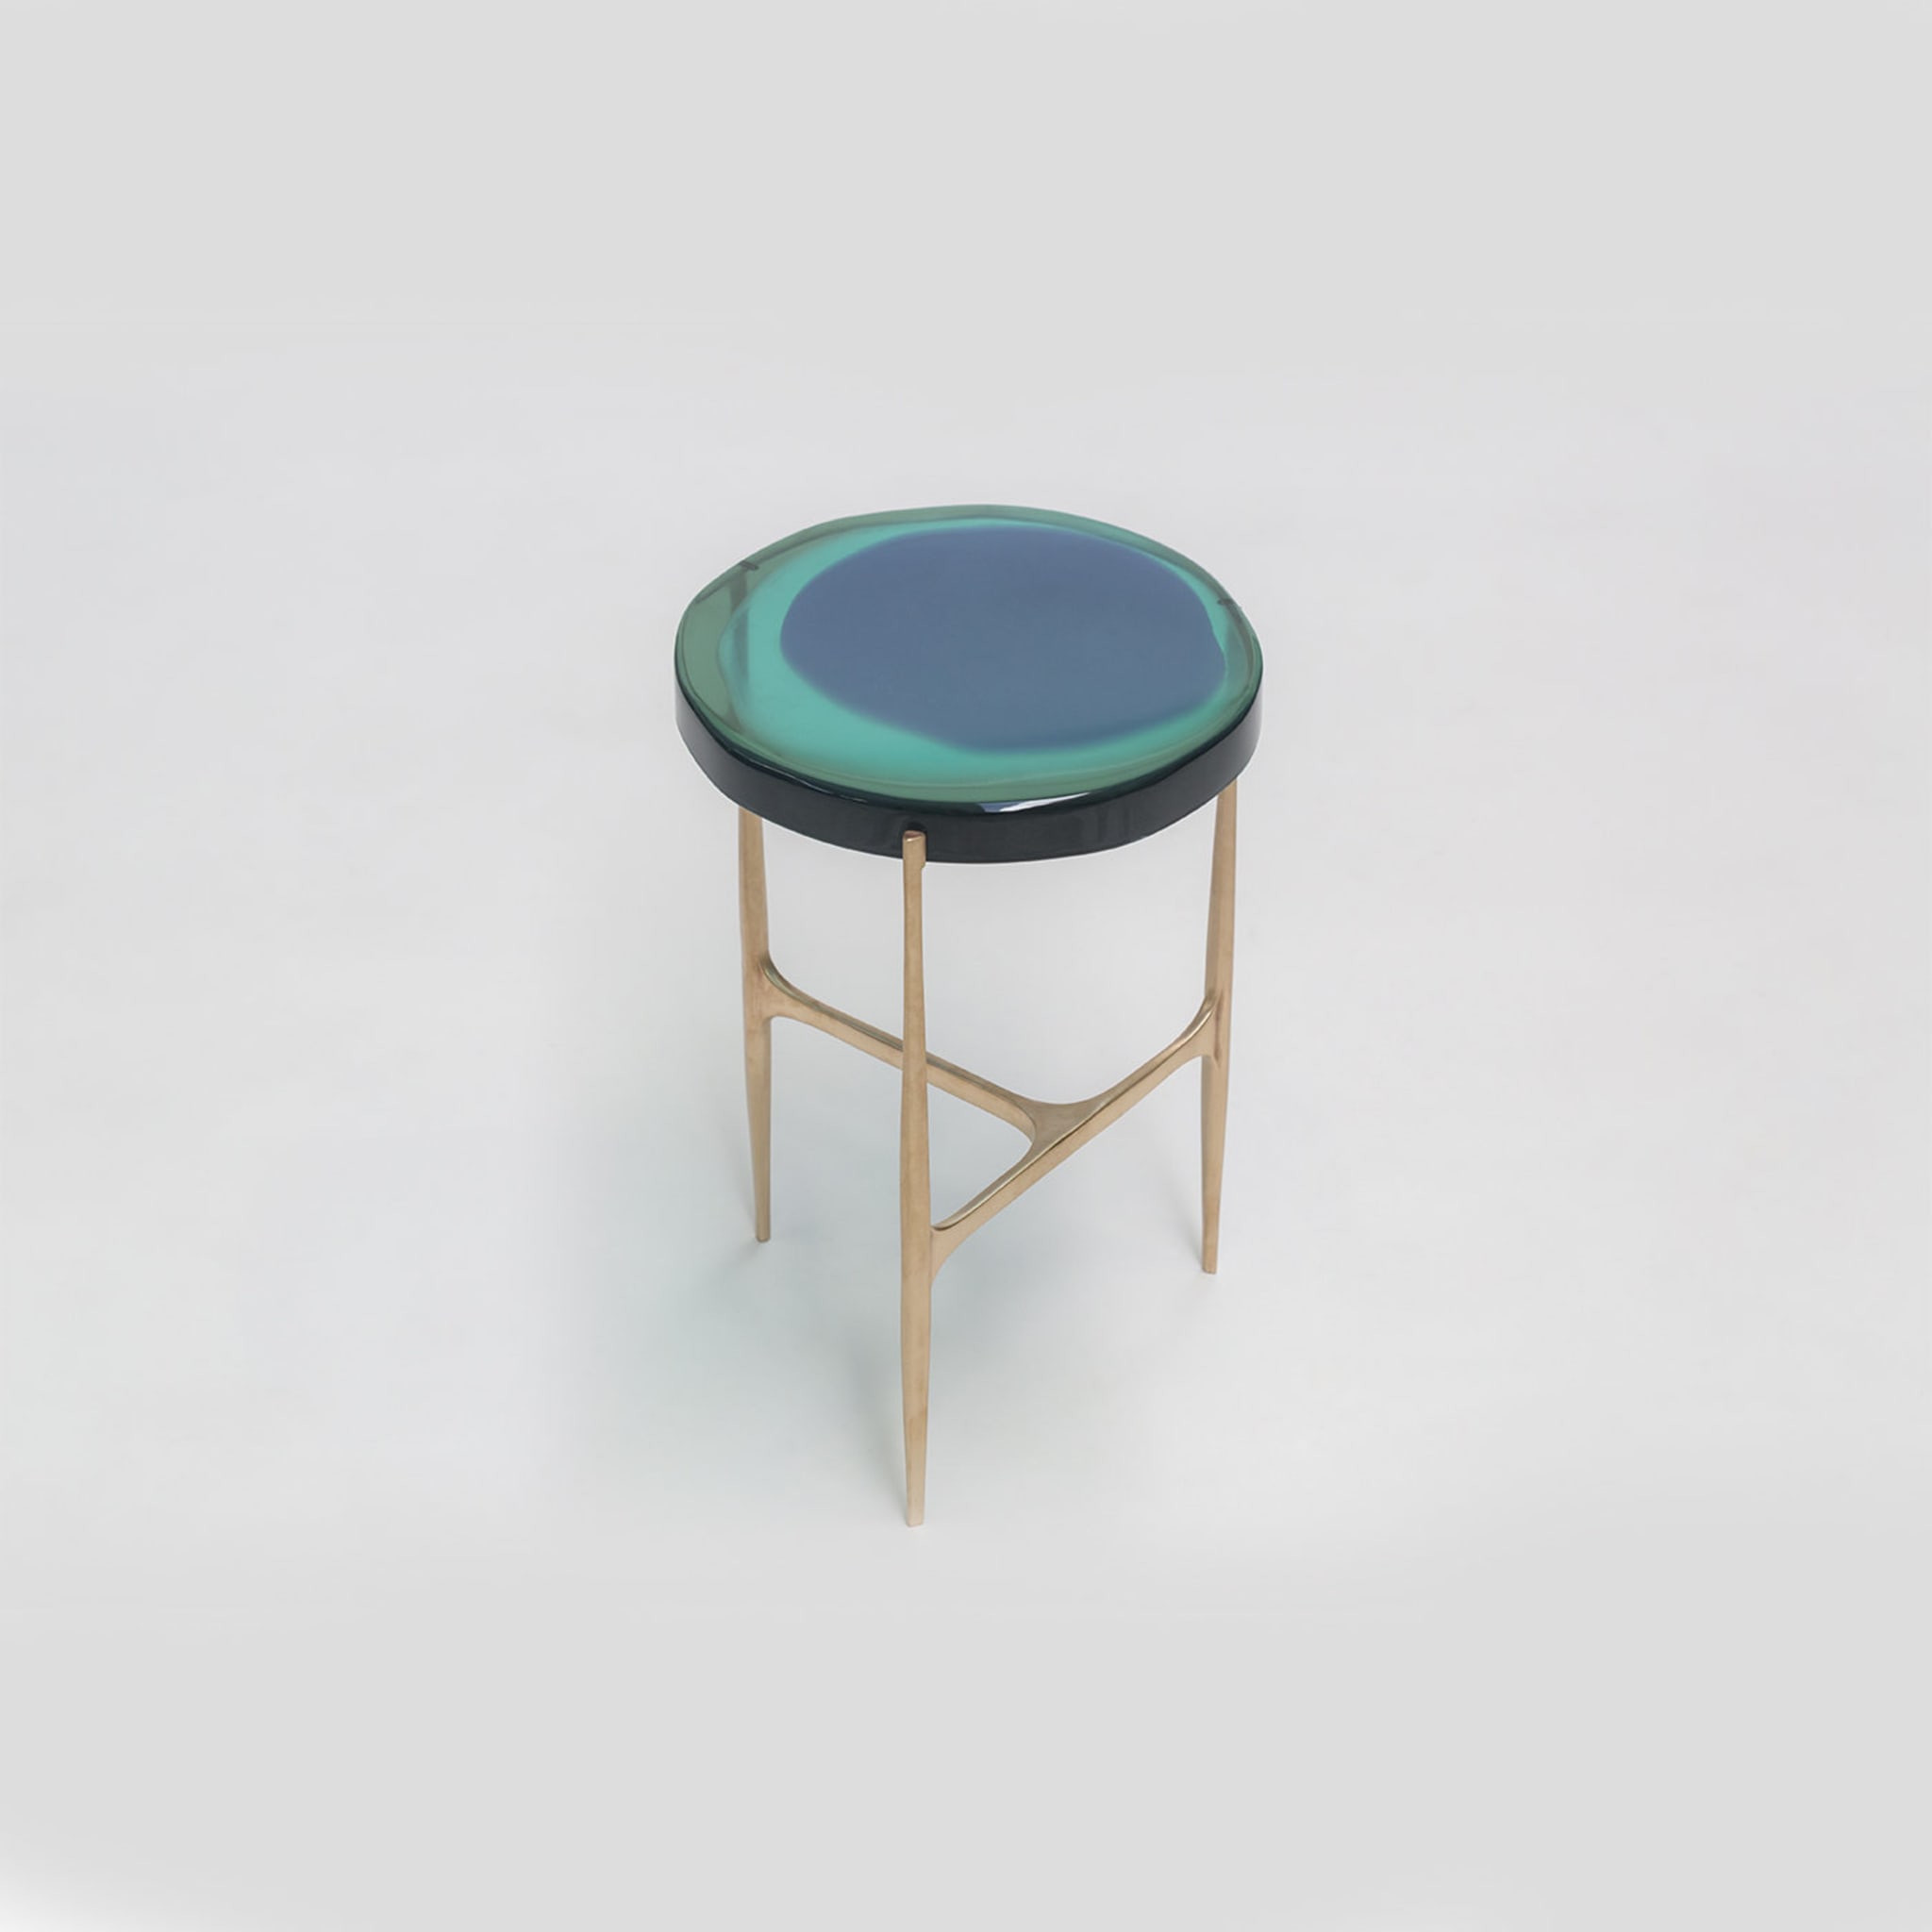 Agatha Modern Bronze Resin Low Side Table Turquoise - Alternative view 1